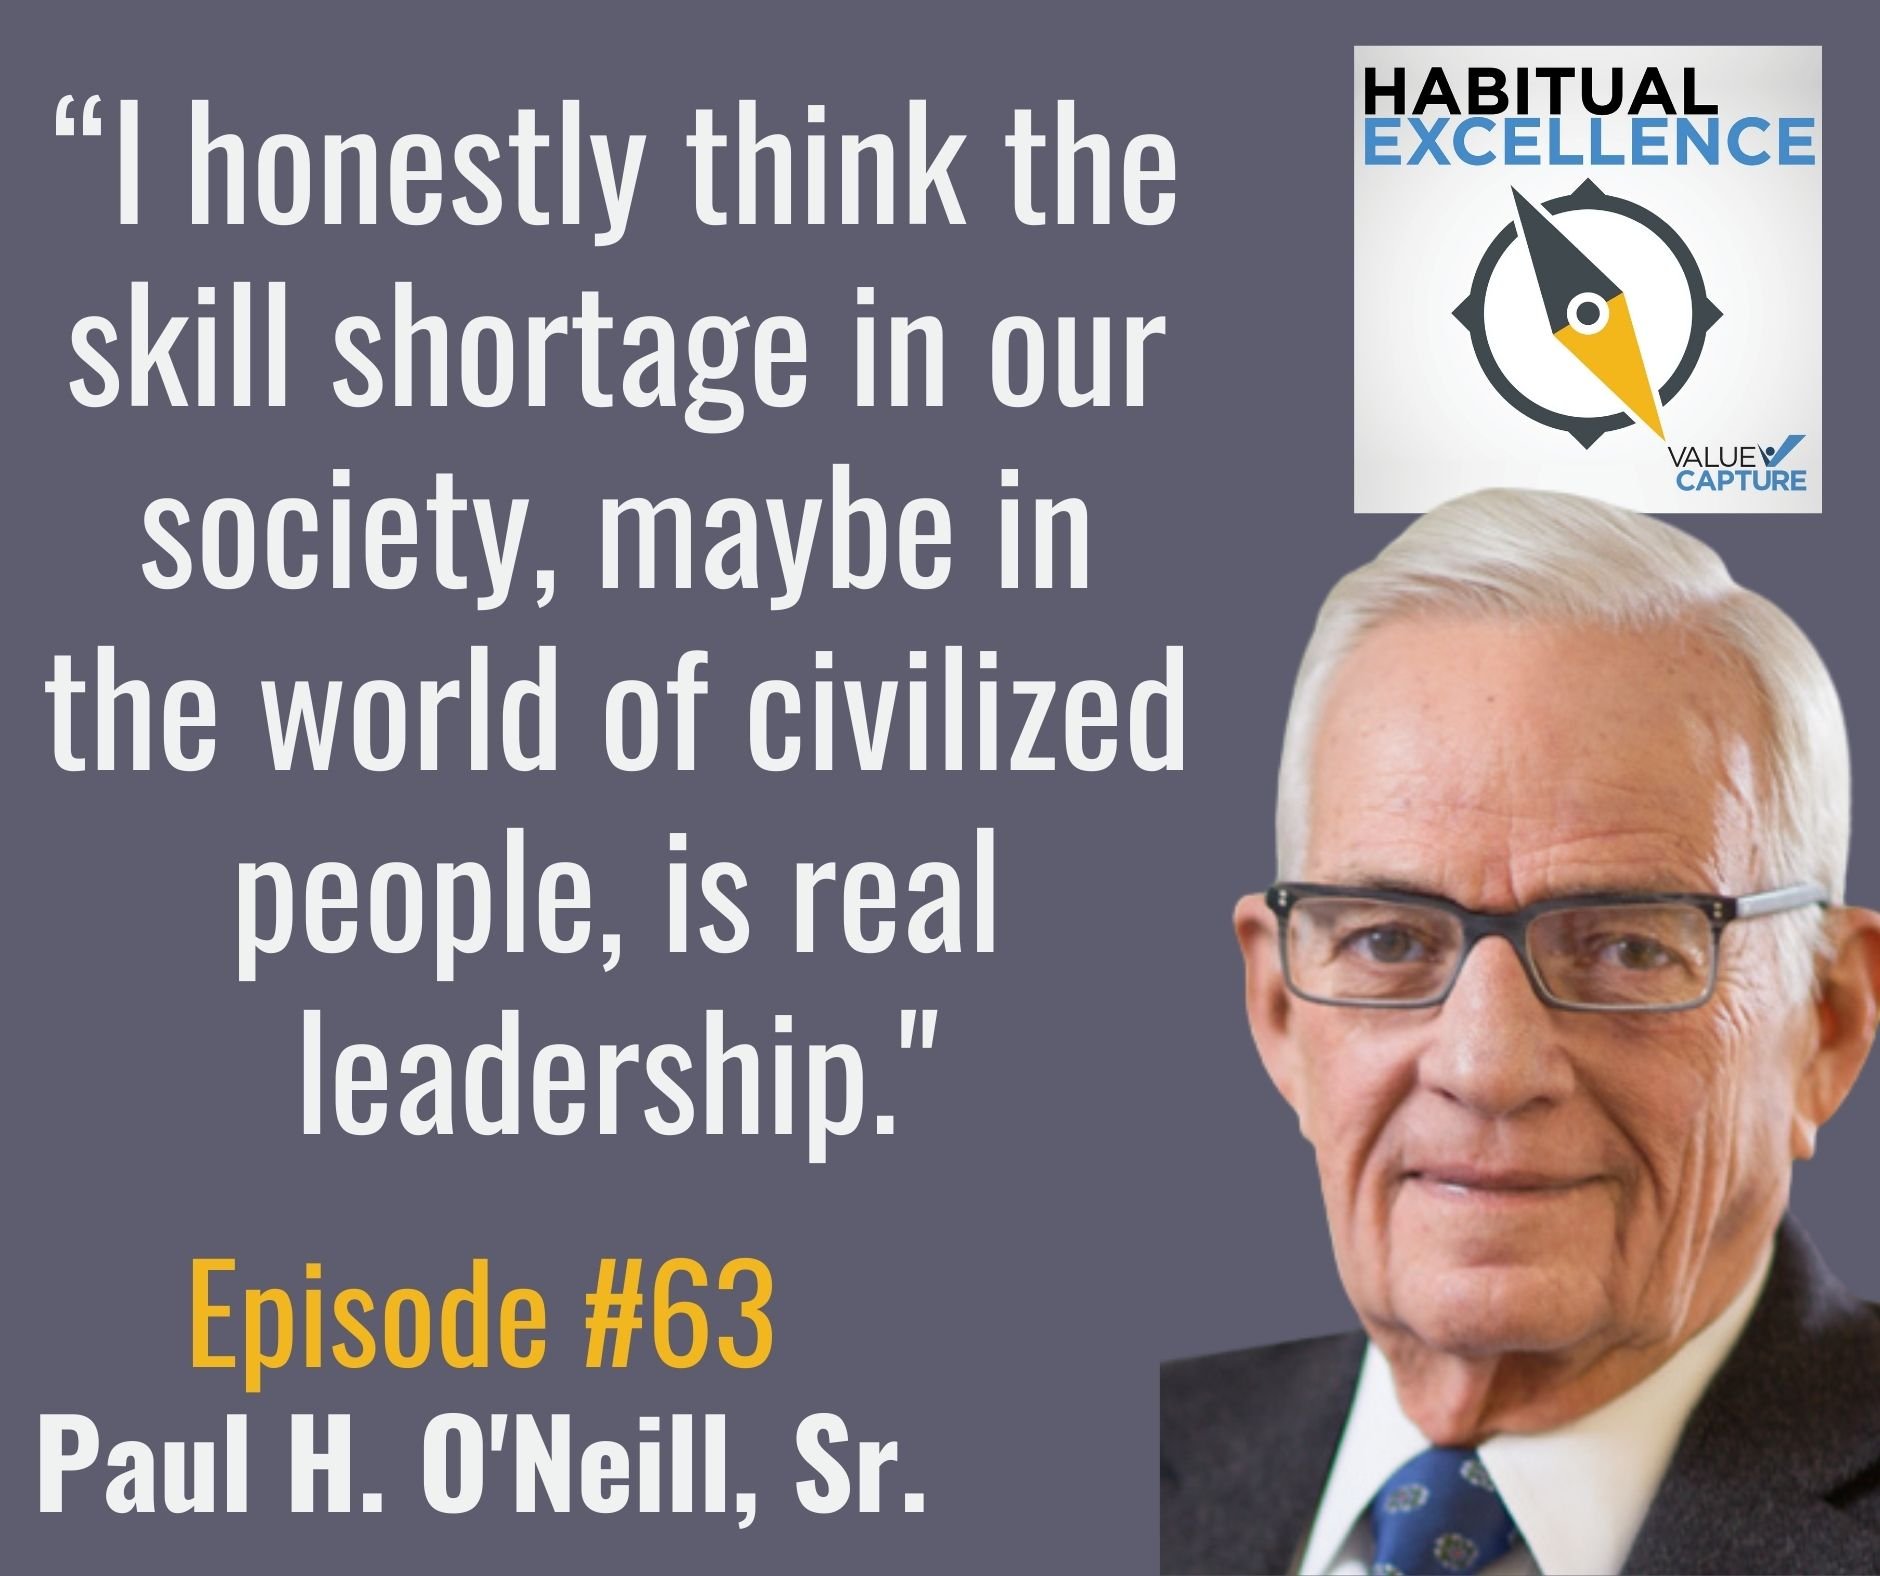 “I honestly think the skill shortage in our society, maybe in the world of civilized people, is real leadership."